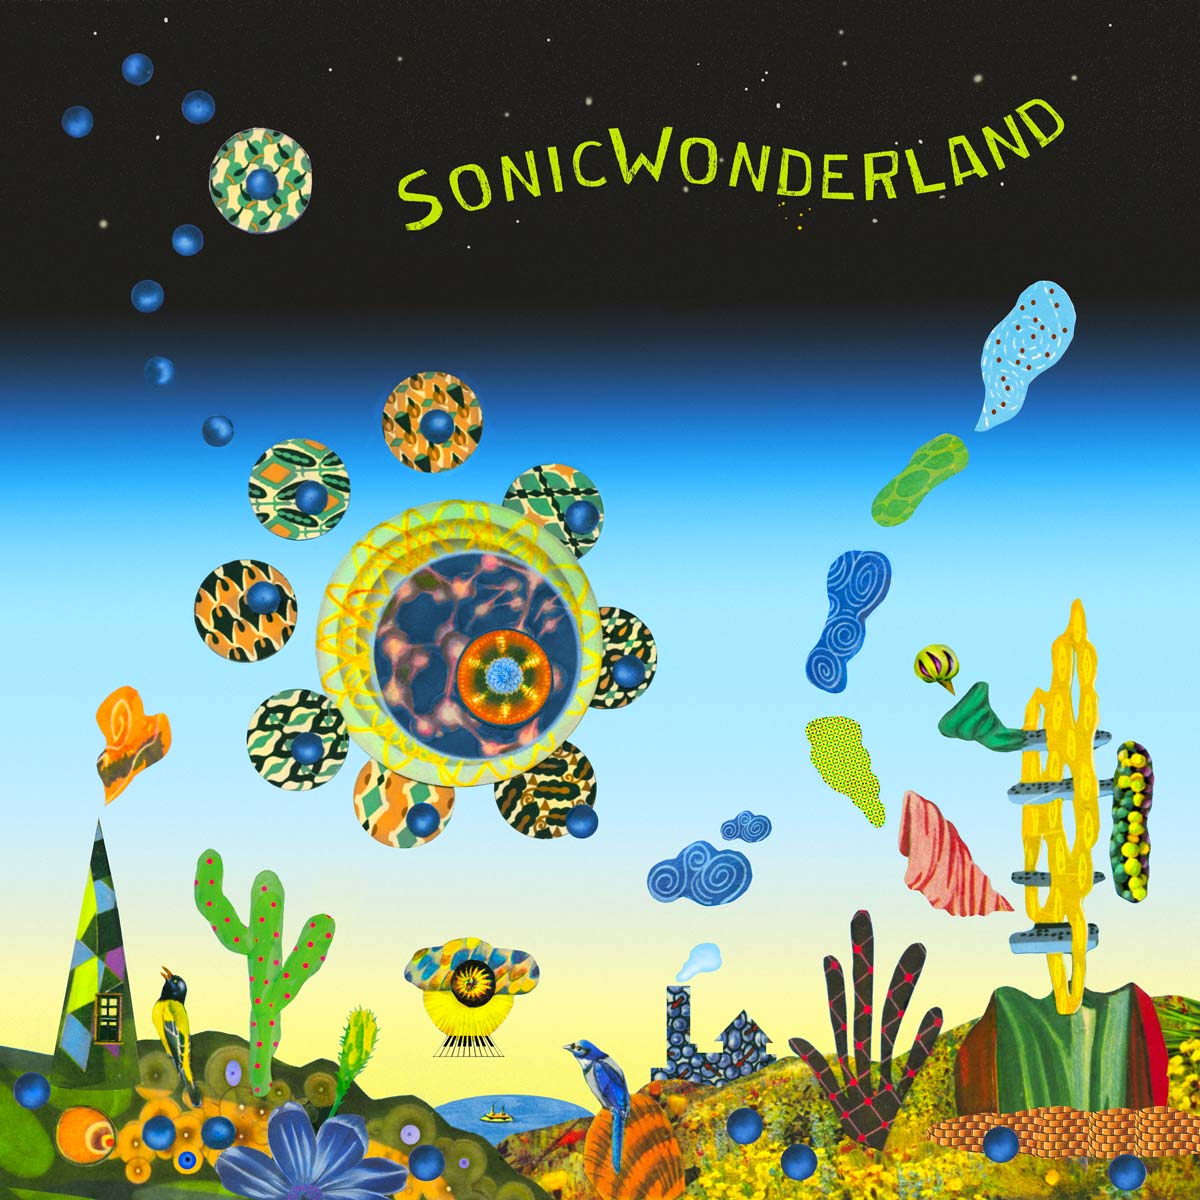 The cover art for “Sonicwonderland” was designed by Lou Beach, who also designed the album covers for several iconic Weather Report albums (Lou Beach).